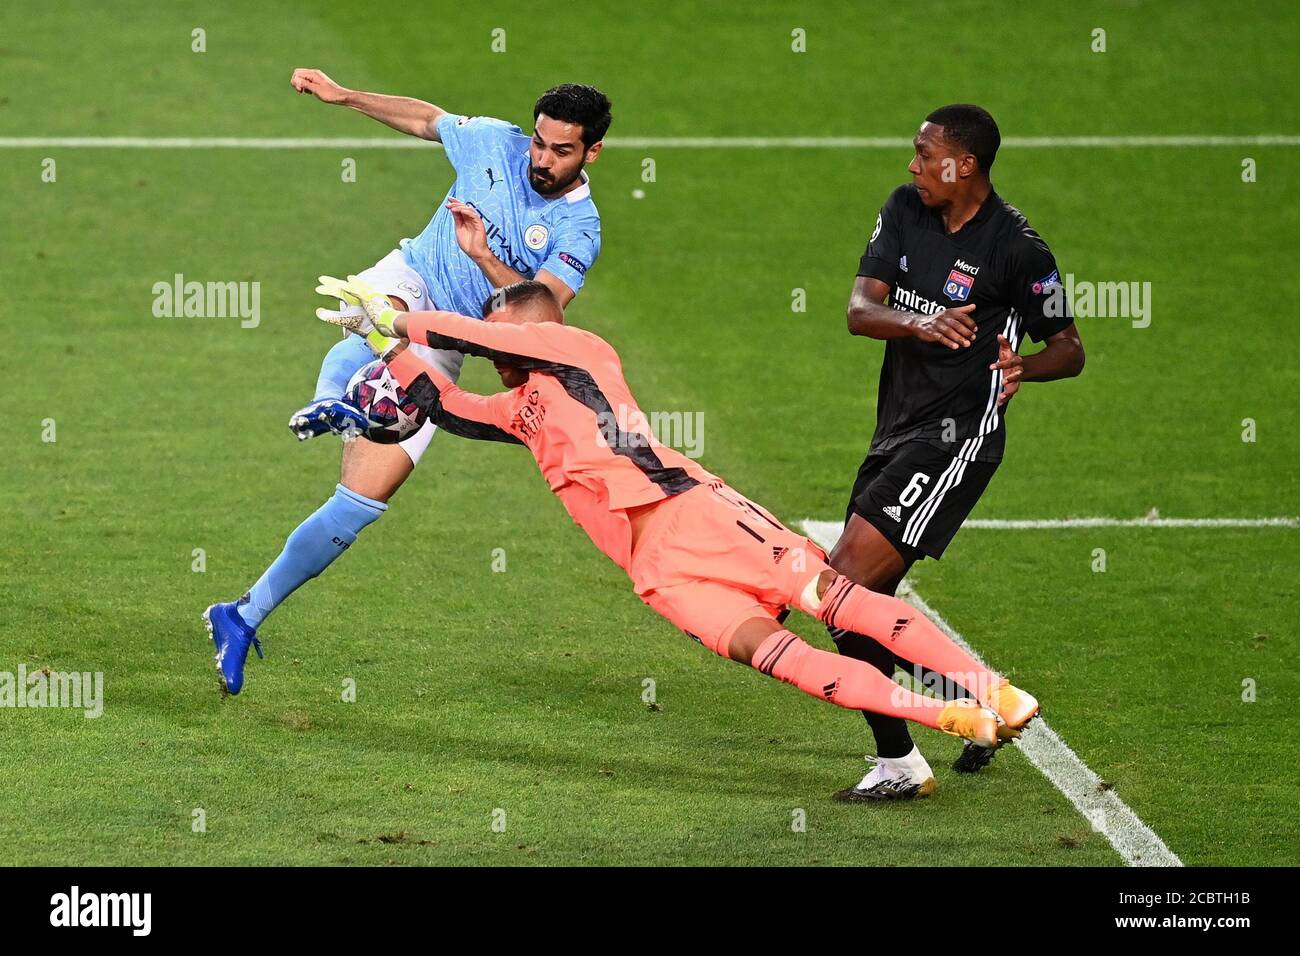 Lisbon, Portugal. 15th Aug, 2020. Anthony Lopes (C) of Olympique Lyon saves from Ilkay Gundogan (L) of Manchester City during the UEFA Champions League Quarter Final match between Manchester City and Olympique Lyon in Lisbon, Portugal, Aug. 15, 2020. Credit: Michael Regan/UEFA/Handout via Xinhua/Alamy Live News Stock Photo